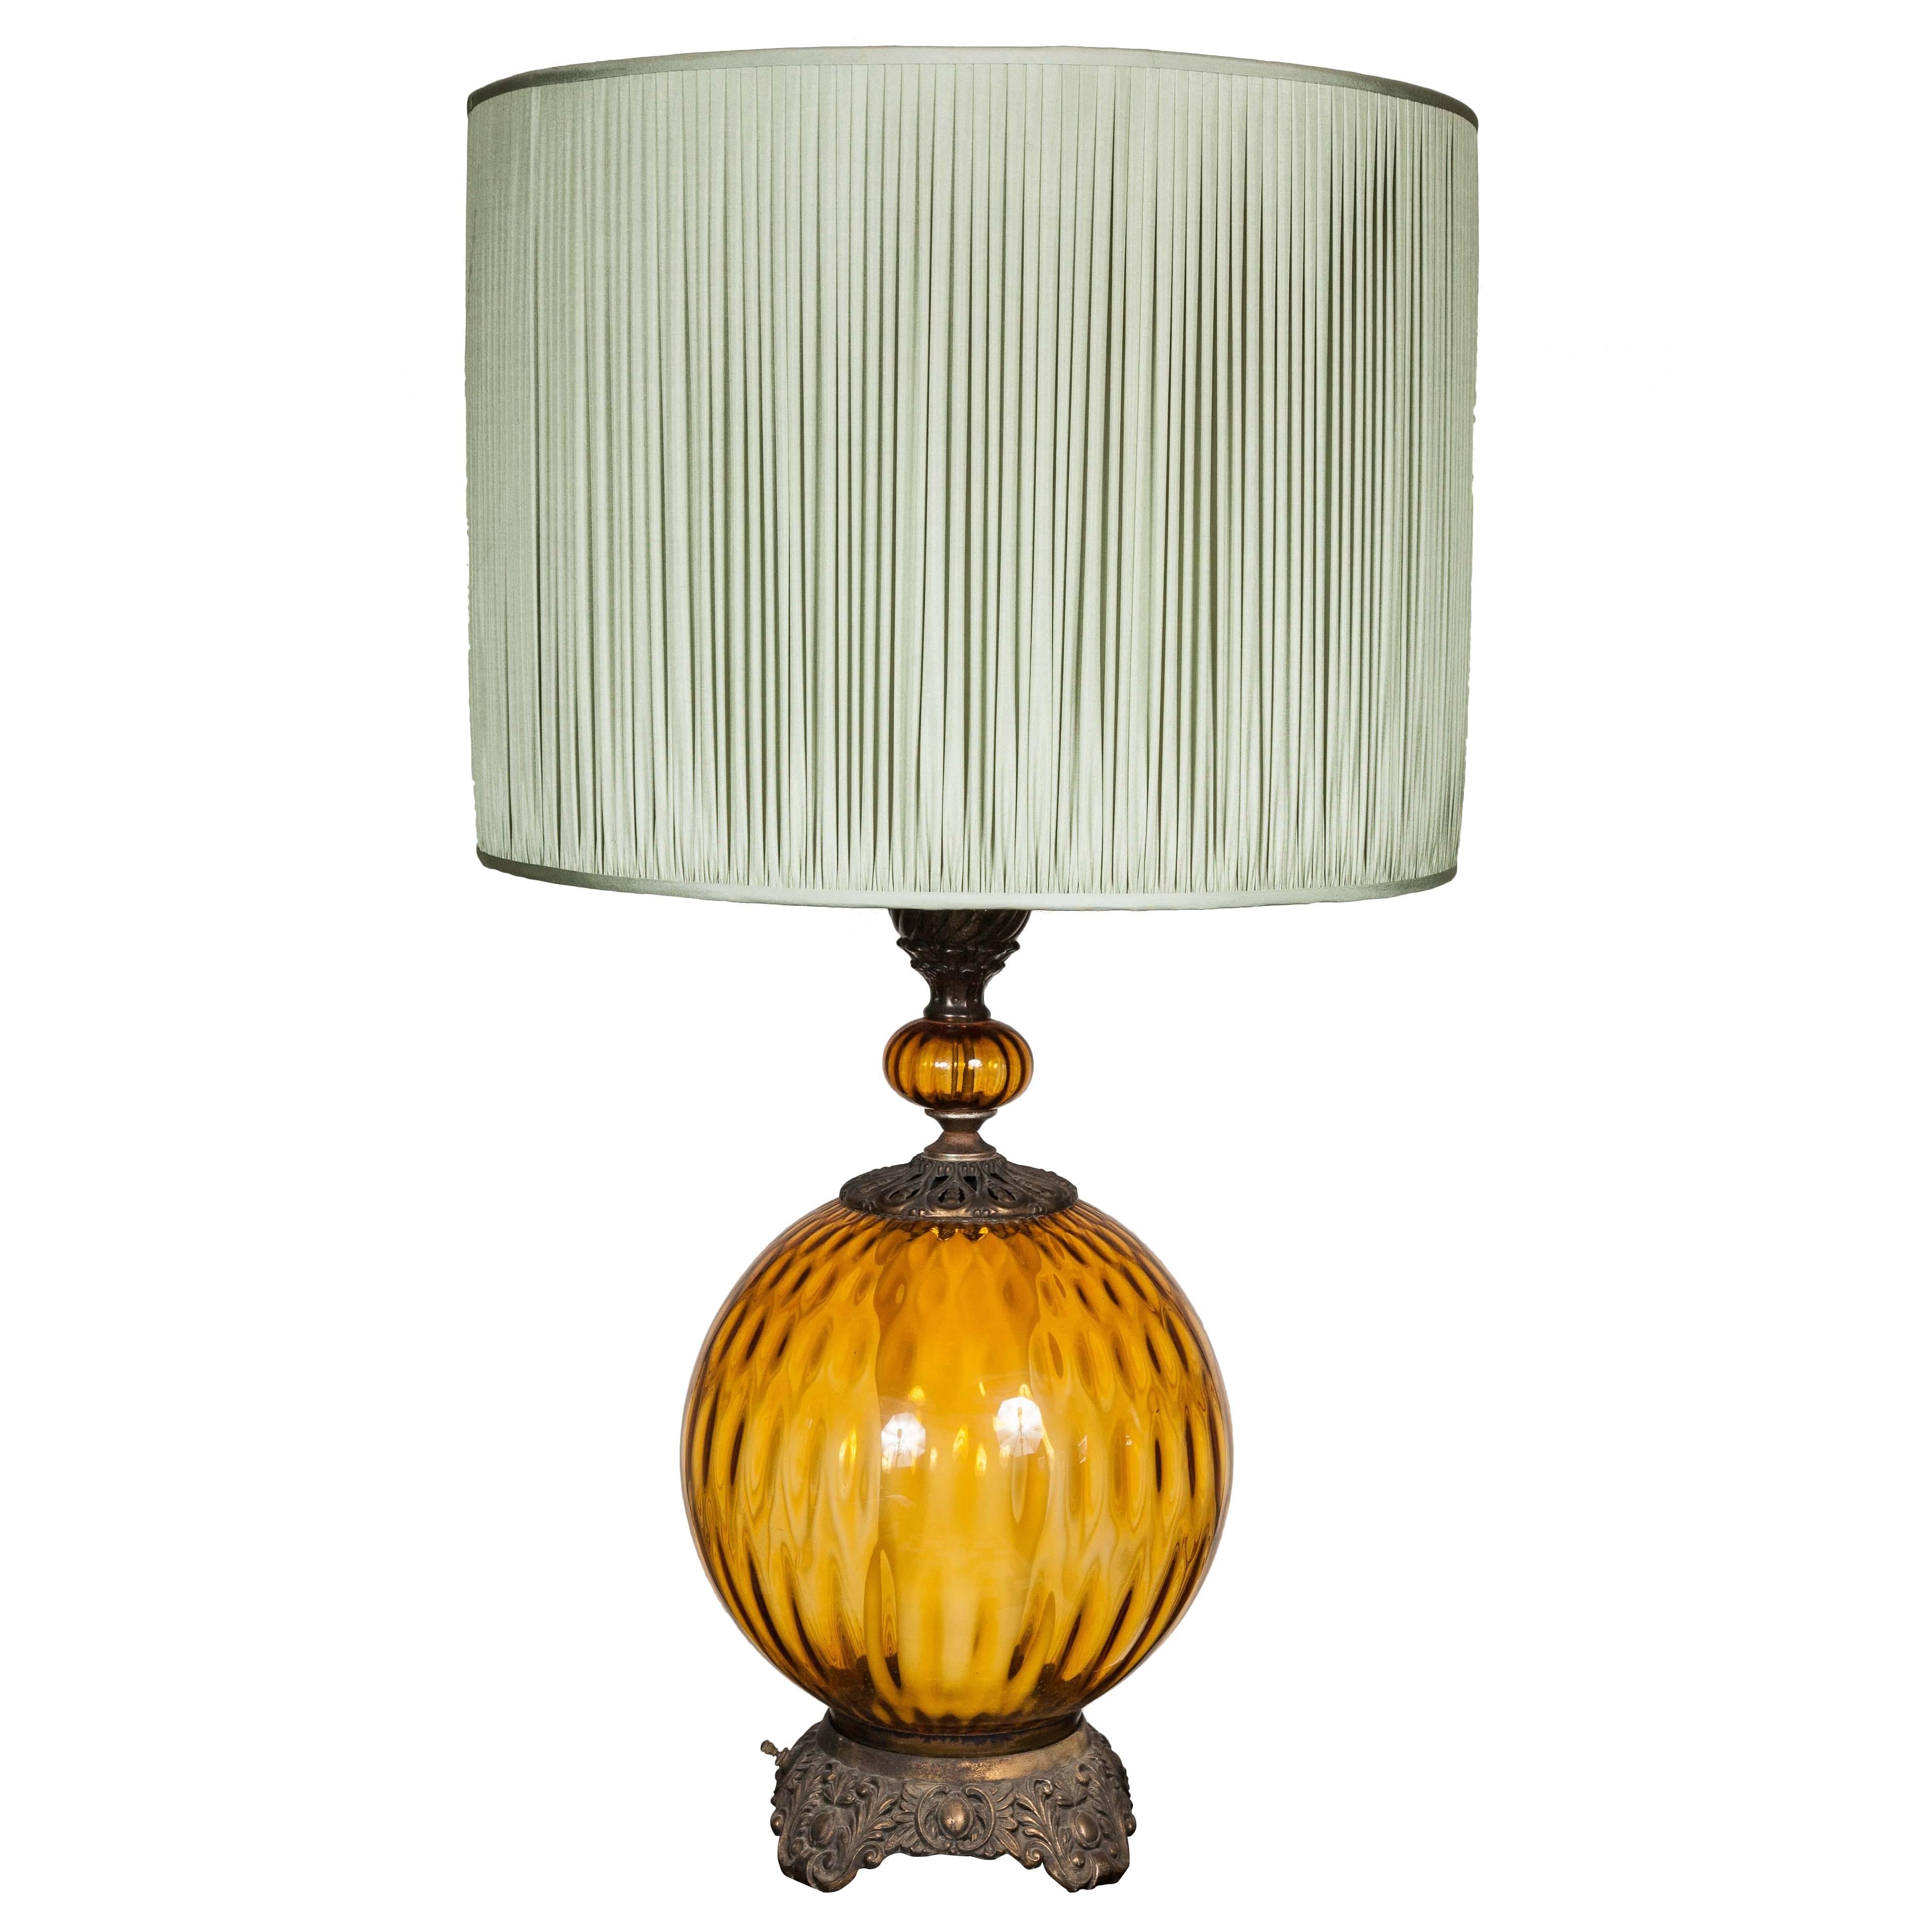 Round Bright Amber Glass Table Lamp with Pale Green Gathered Silk Shade